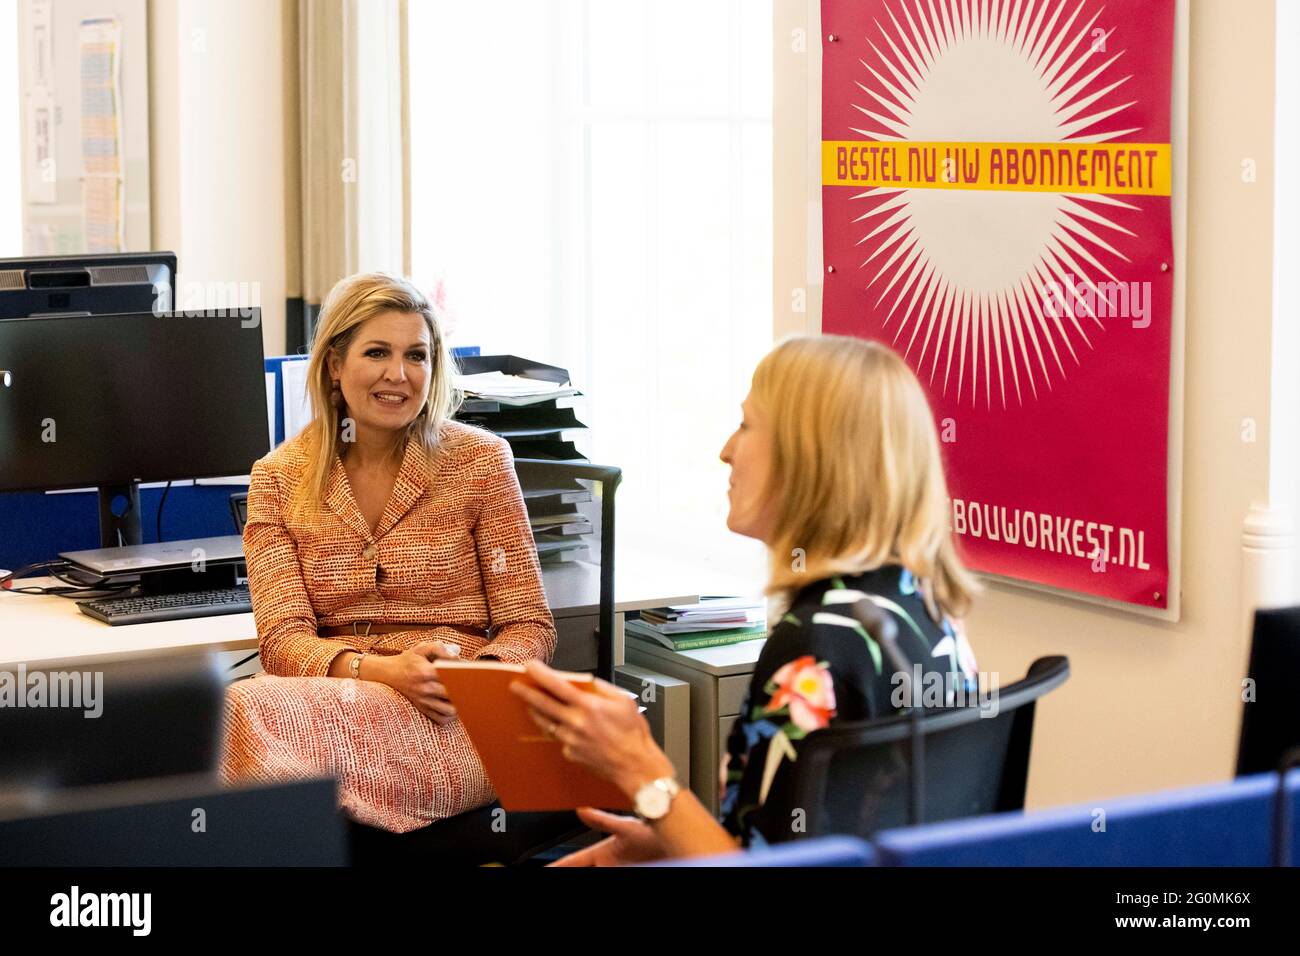 Amsterdam, Niederlande. 02nd June, 2021. Queen Maxima of The Netherlands at the Academie of the Koninklijk Concertgebouworkest in Amsterdam, on June 02, 2021, for a workvisit, talked about the activities during the corona pandemic, the orchestras plans for the future and the various education programs Credit: Albert Nieboer/Netherlands OUT/Point de Vue OUT/dpa/Alamy Live News Stock Photo